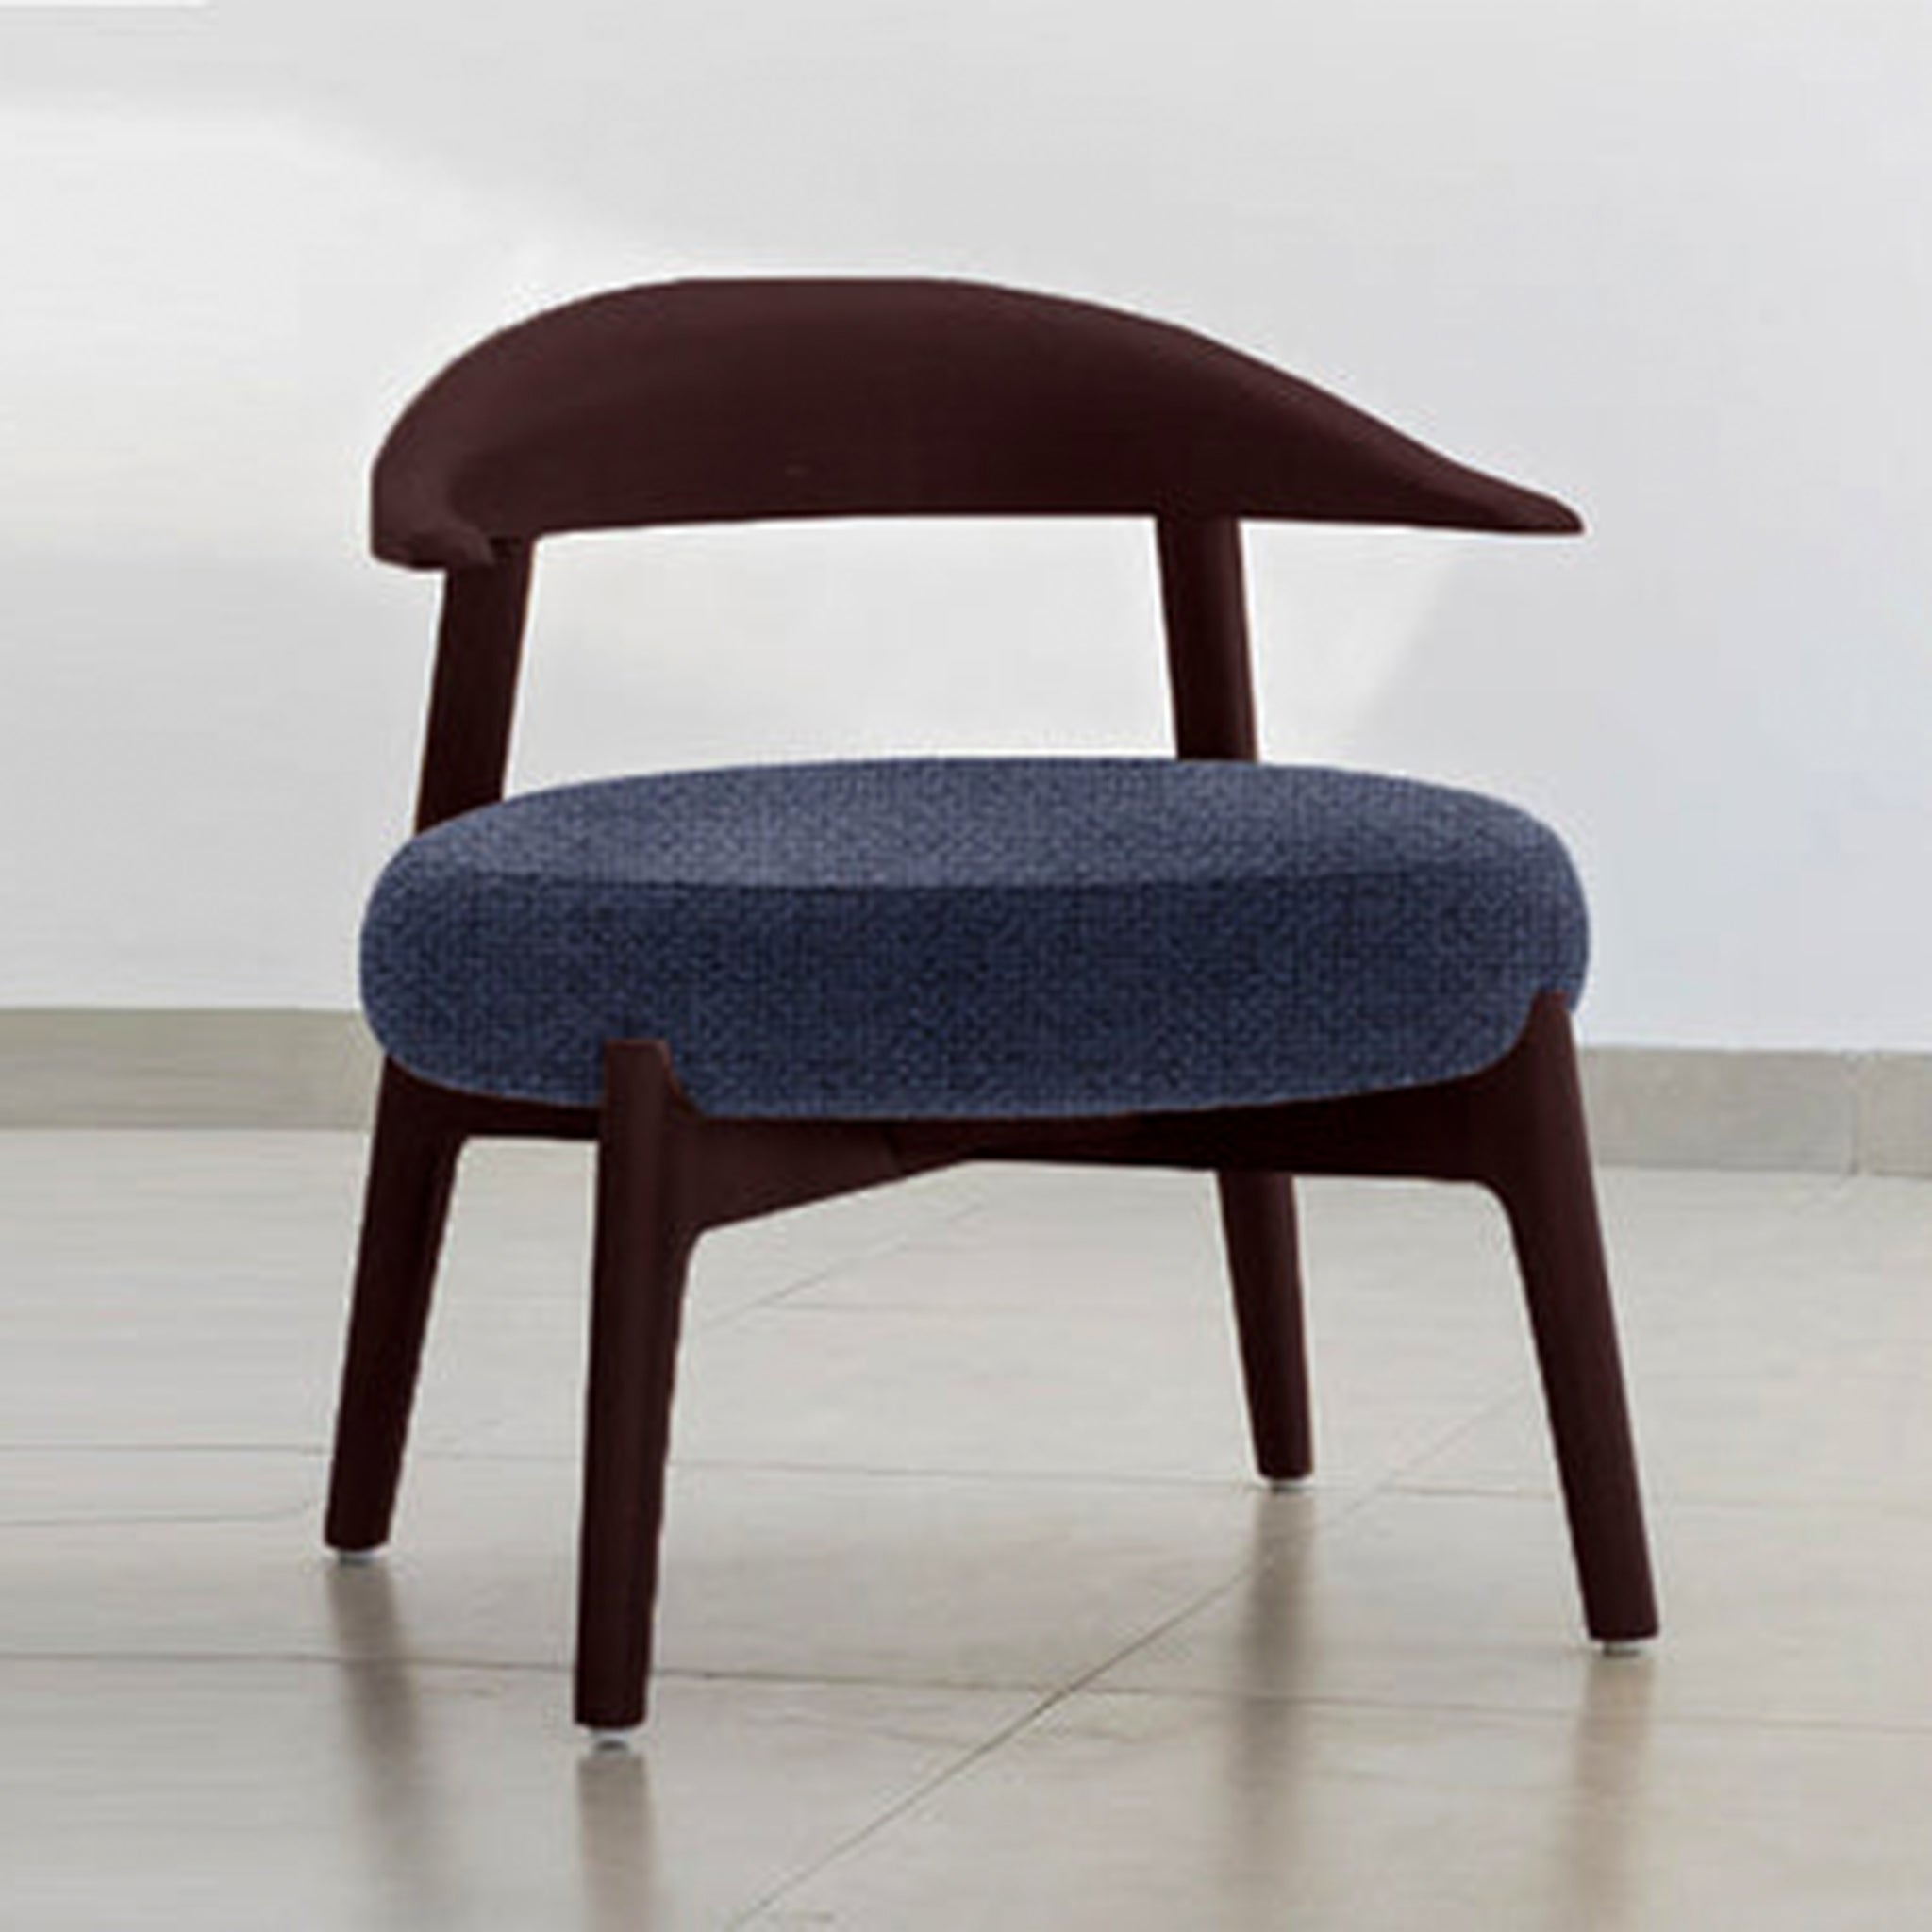 "The Hyde Accent Chair with unique wooden curves and comfortable seat"